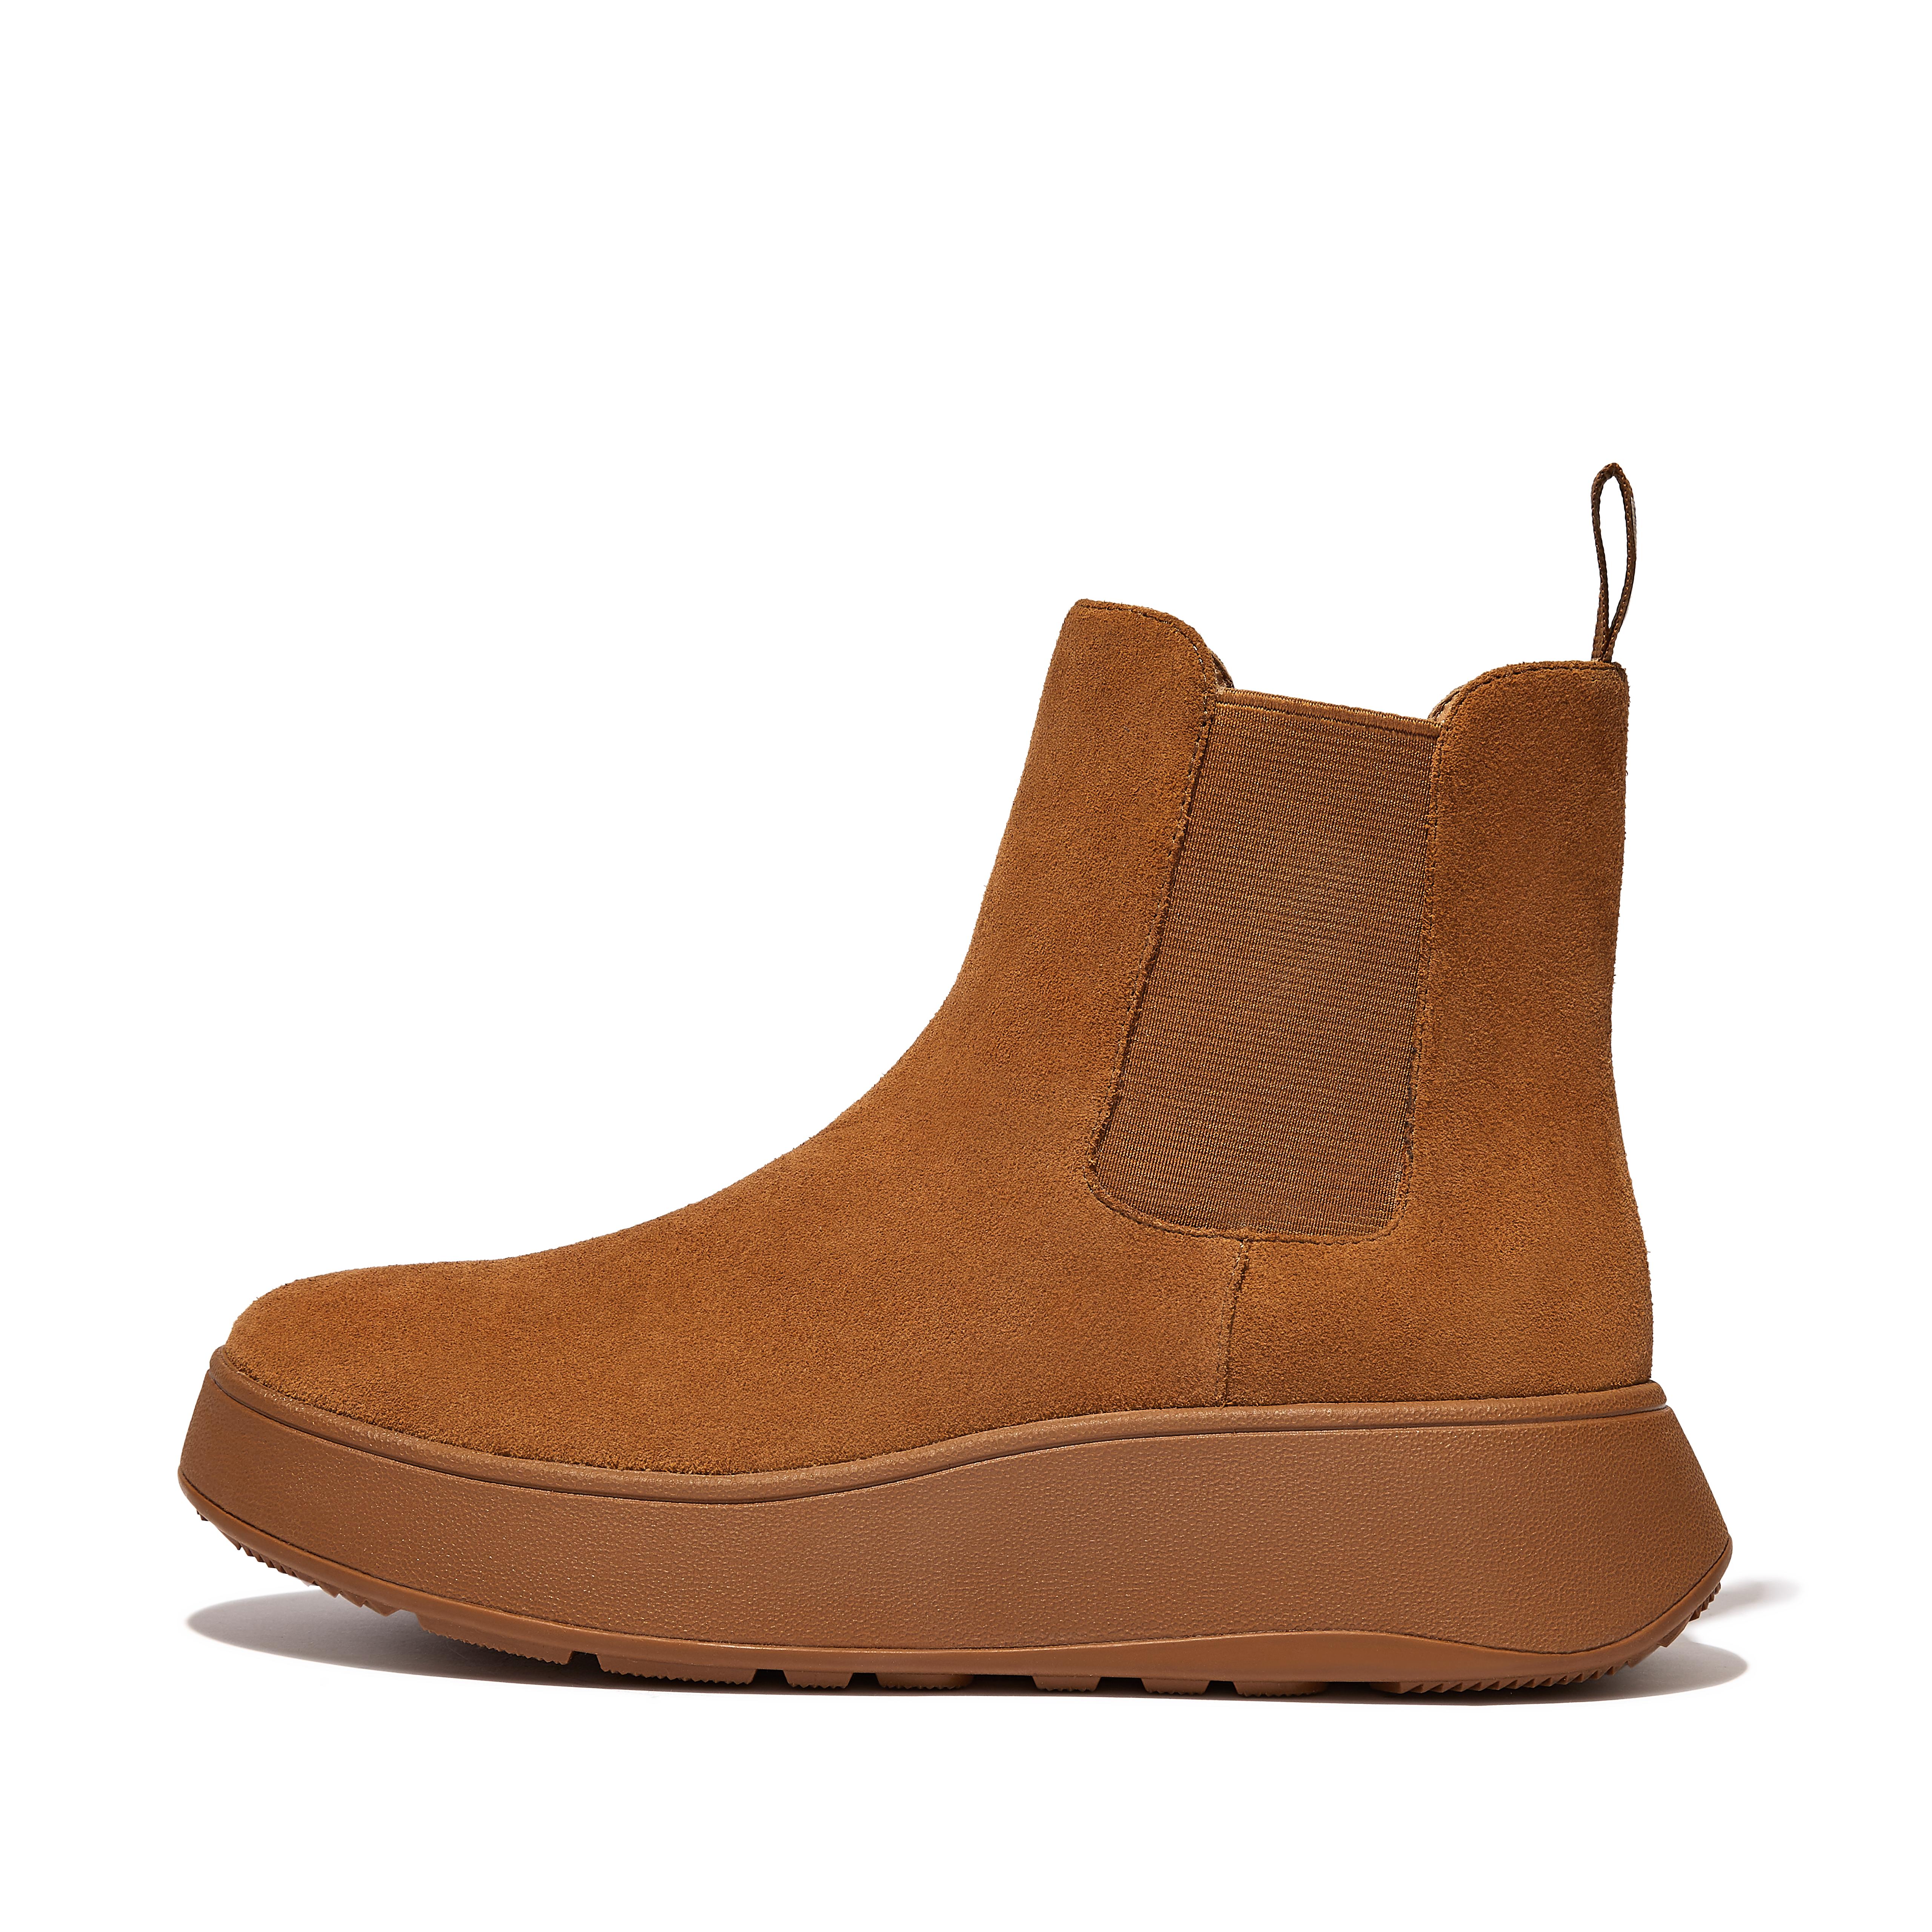 Fitflop Suede Flatform Chelsea Boots,Light Tan